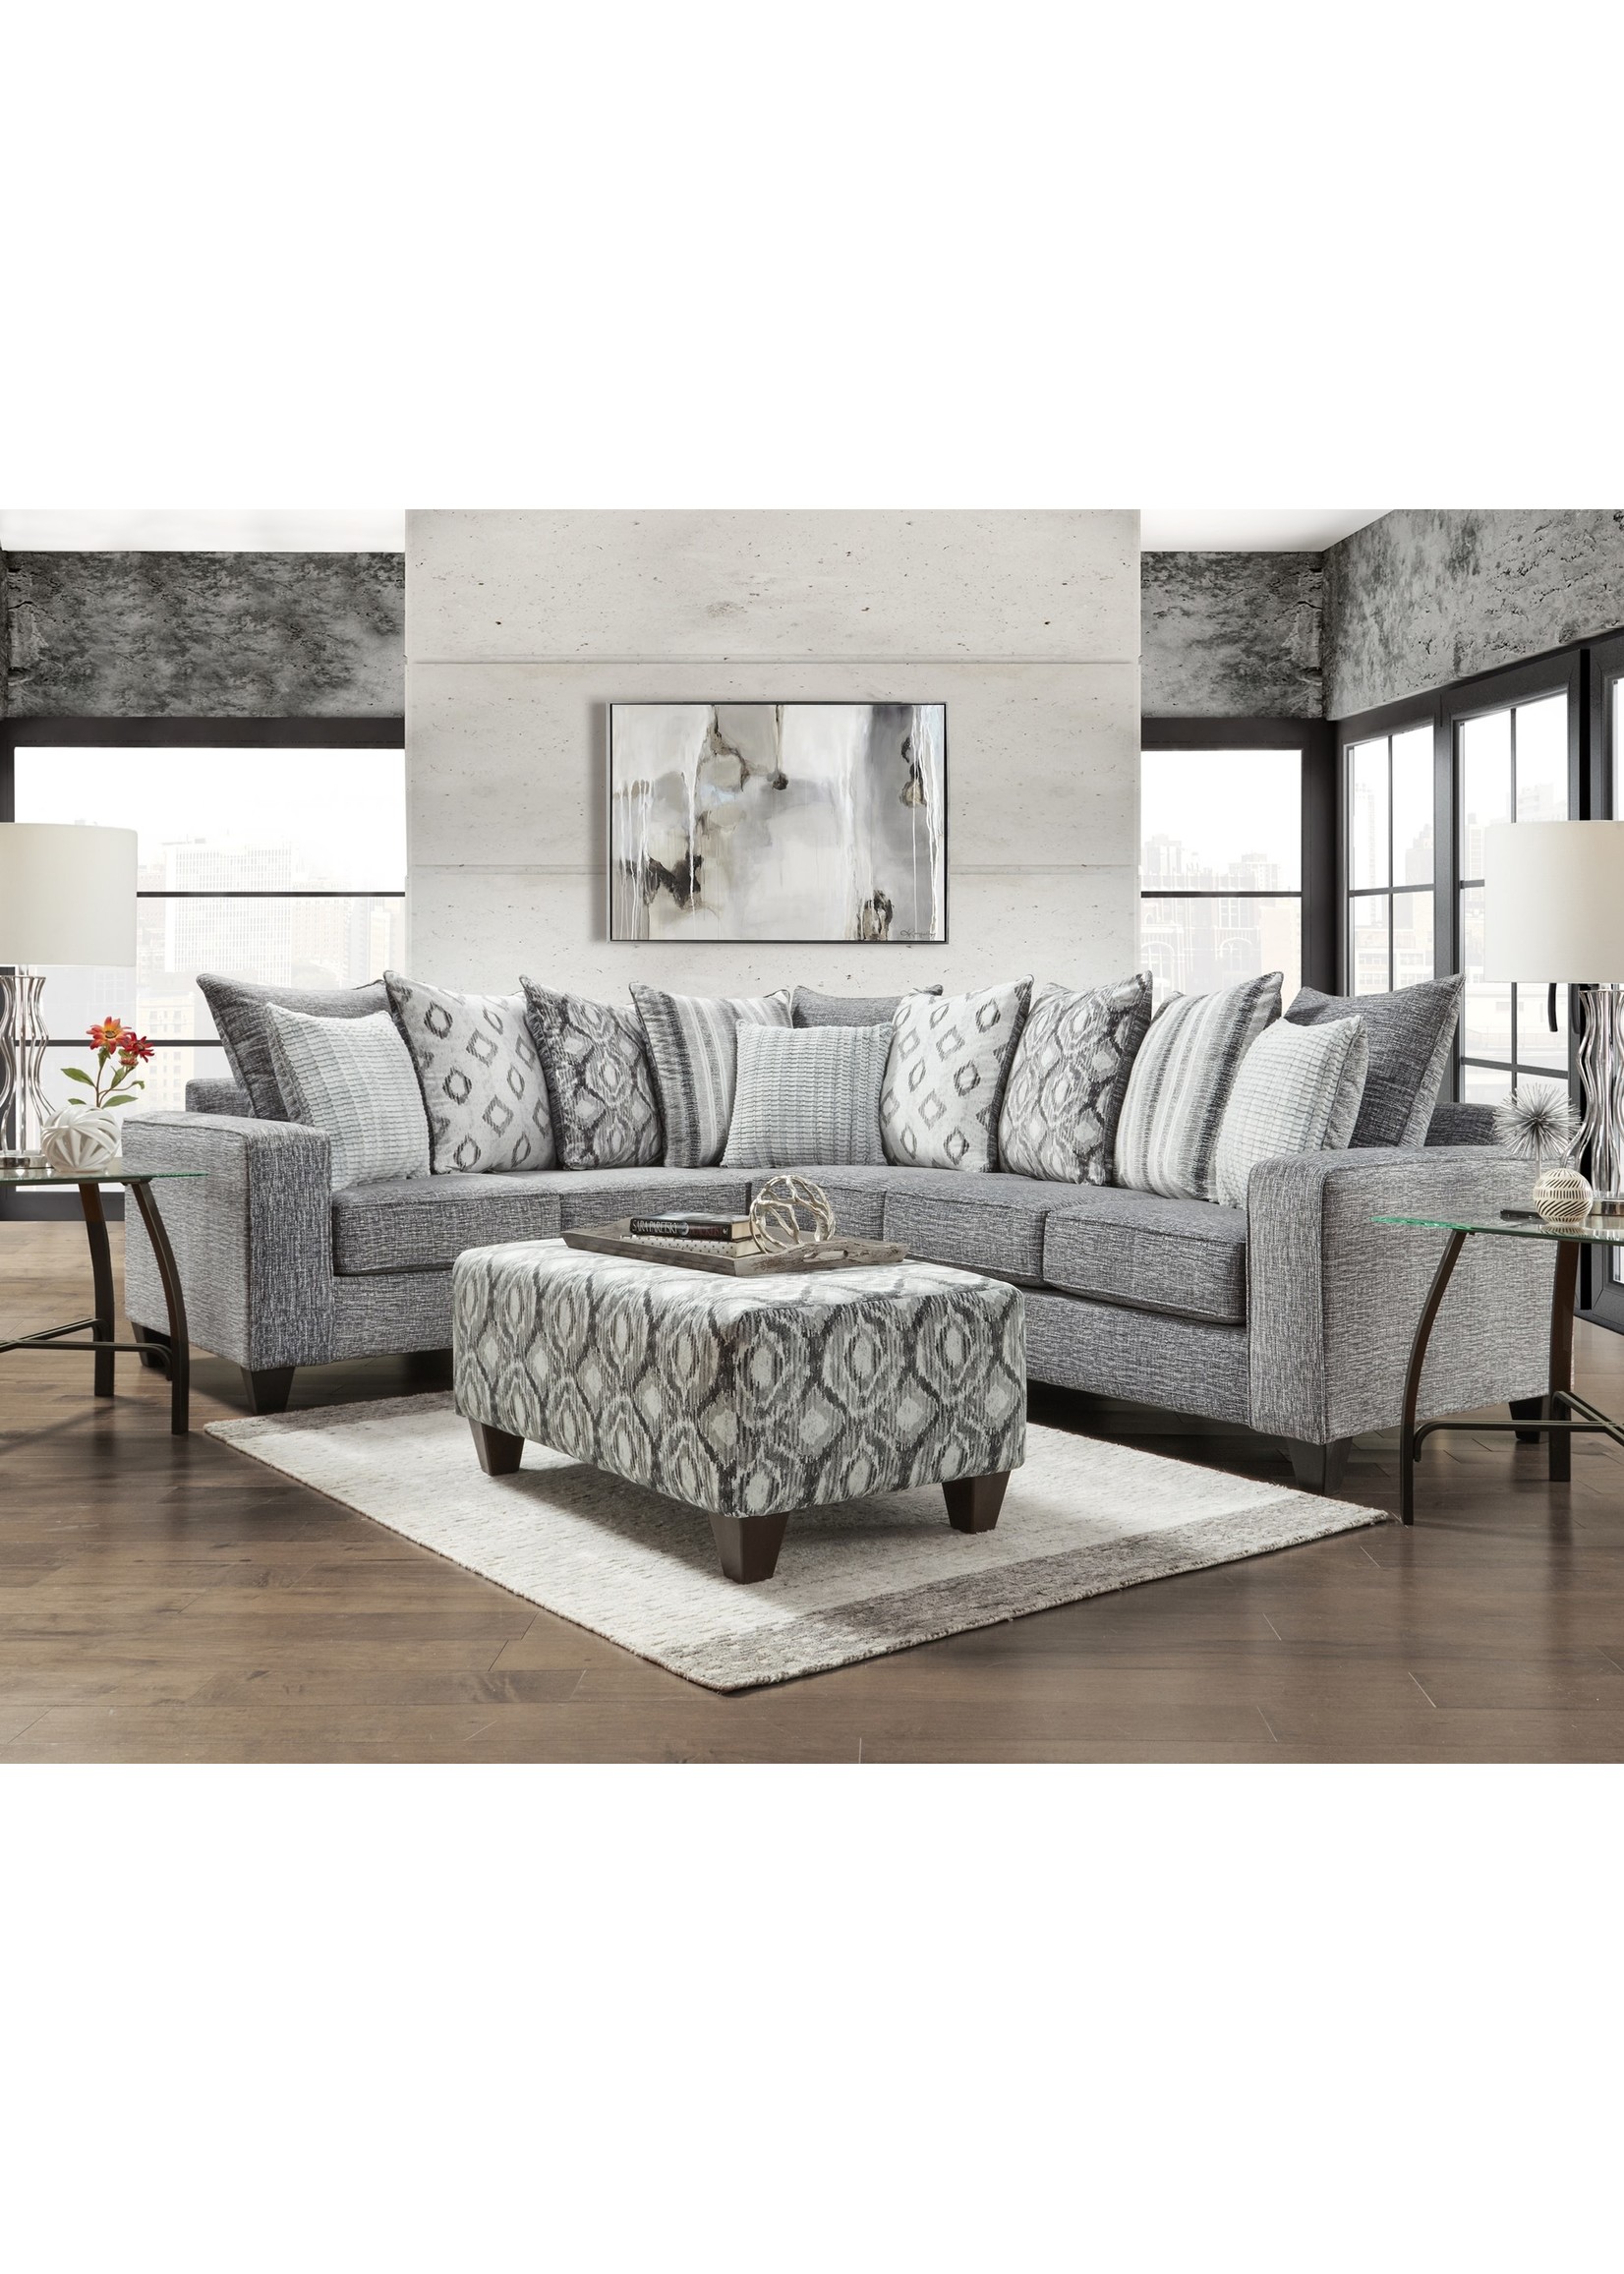 AFFORDABLE 5850 STONEWASH CHARCOAL SECTIONAL